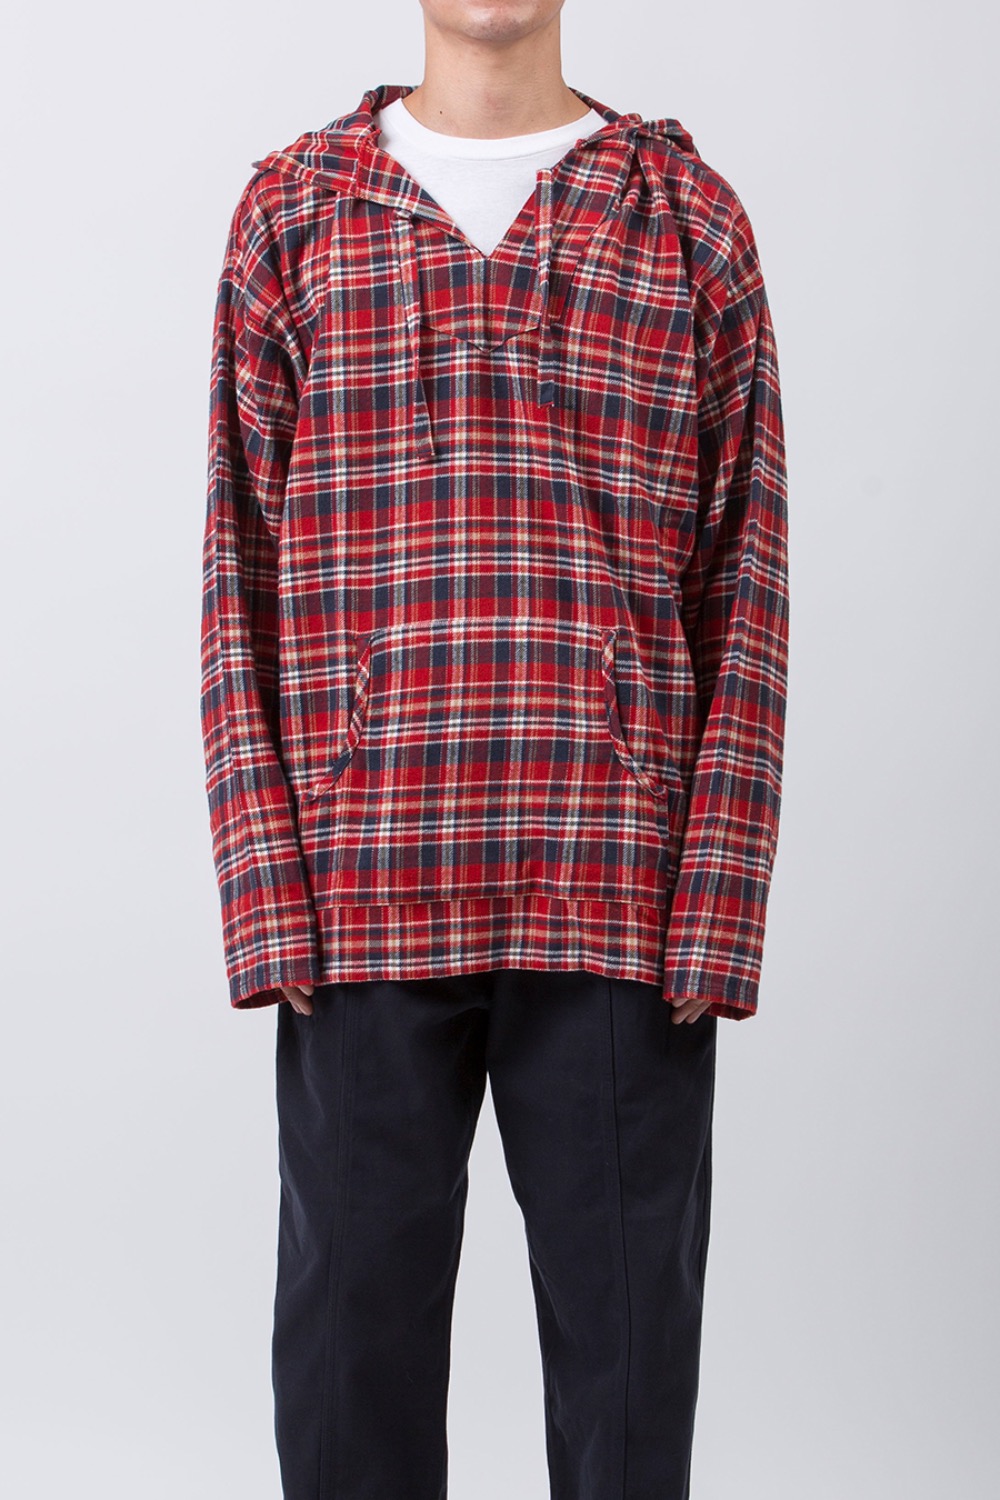 (23FW) MEXICAN PARKA - FLANNEL TWILL / PLAID RED/NAVY